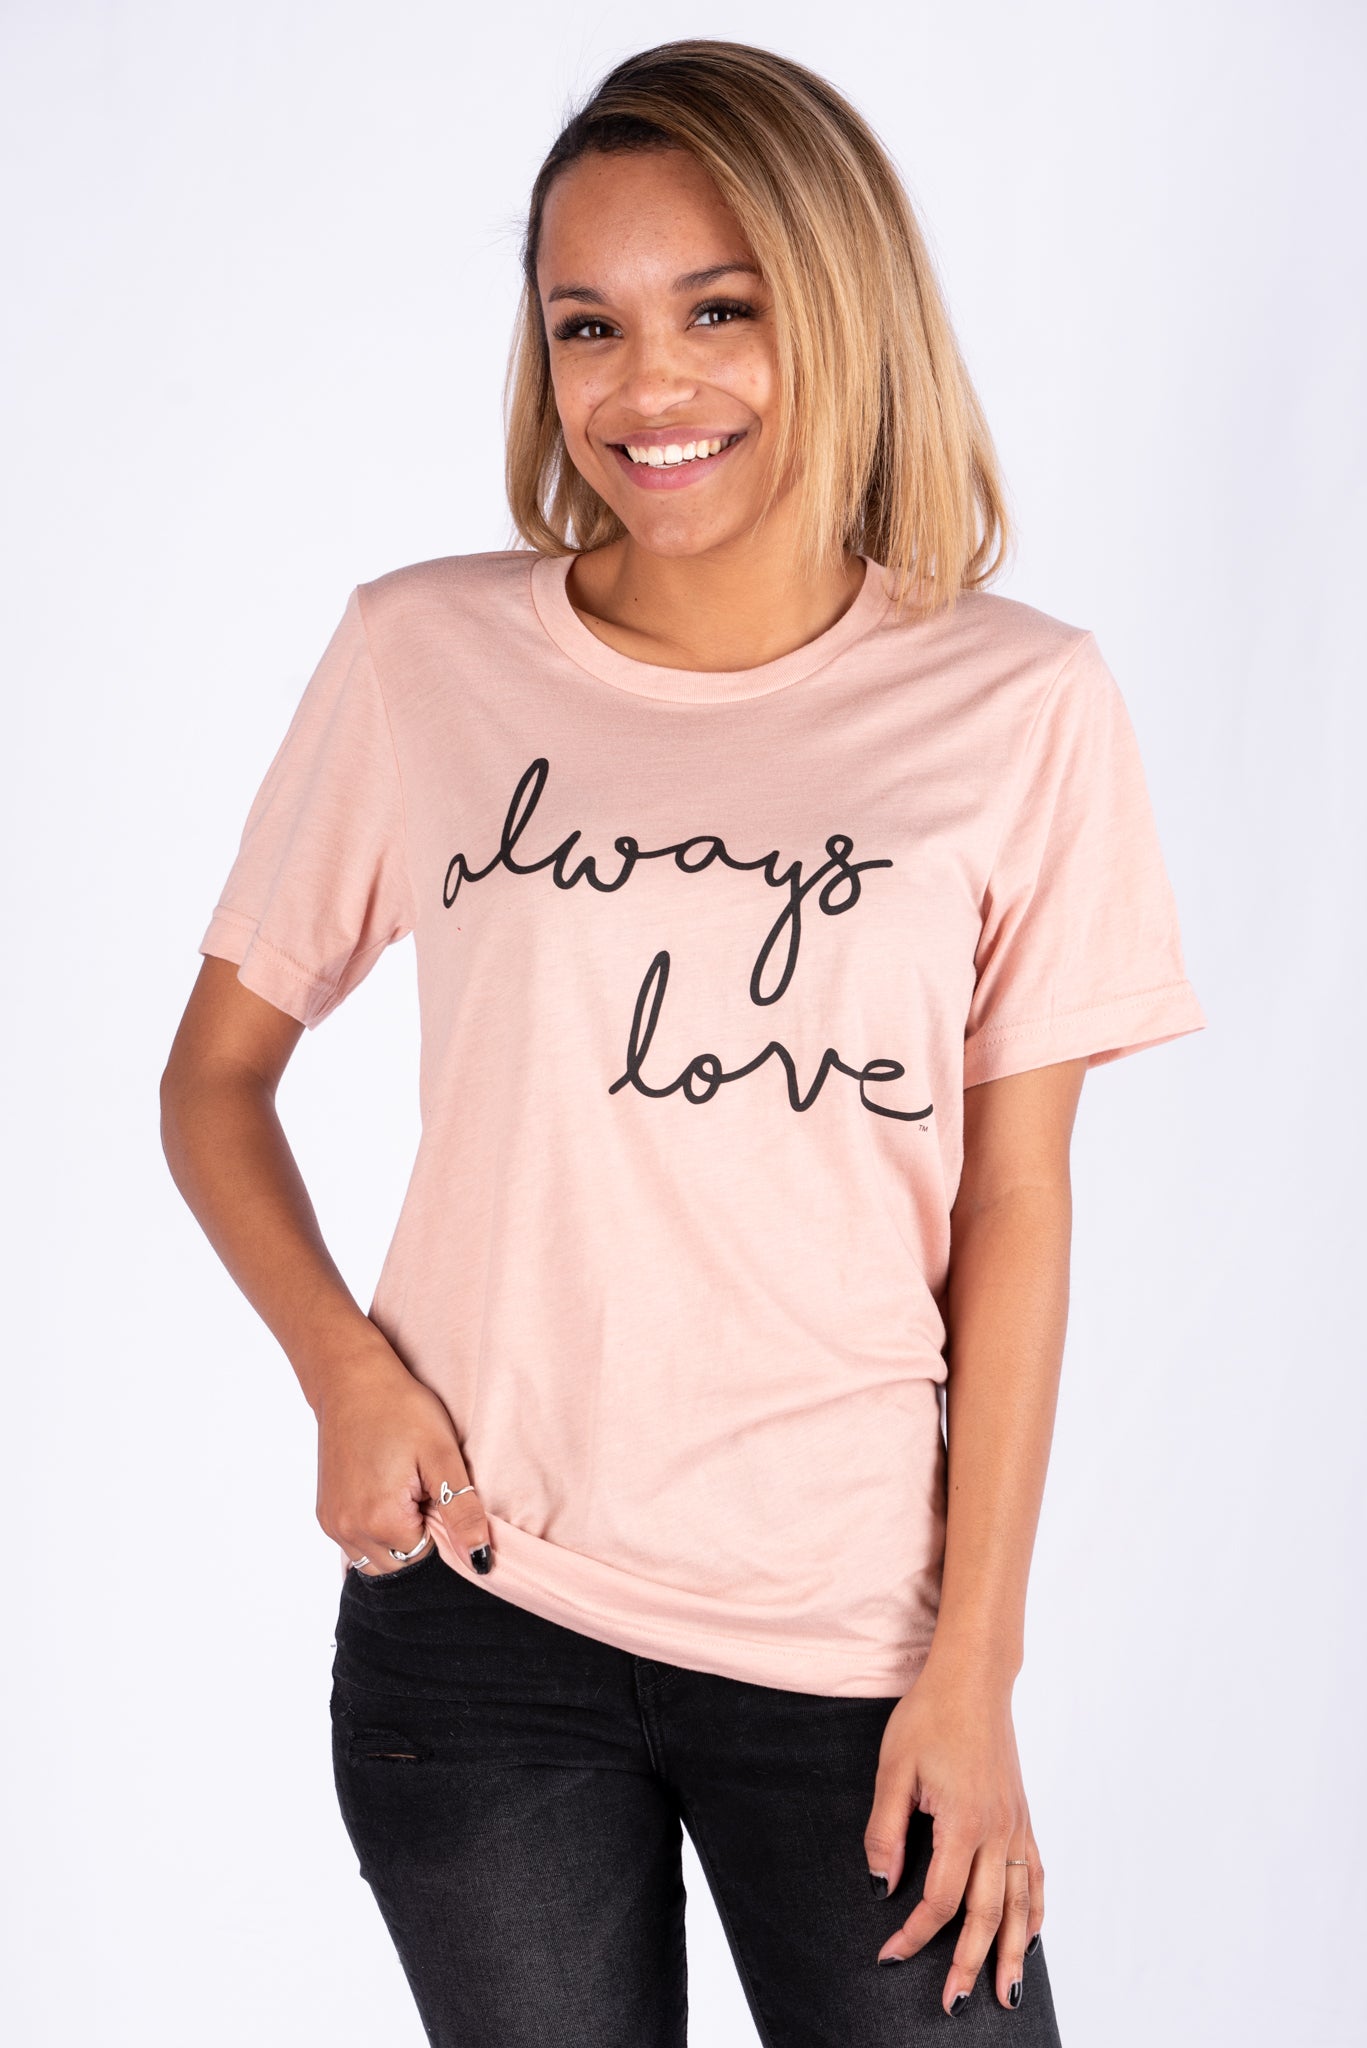 Always love unisex short sleeve t-shirt peach - Stylish T-shirts - Trendy Graphic T-Shirts and Tank Tops at Lush Fashion Lounge Boutique in Oklahoma City